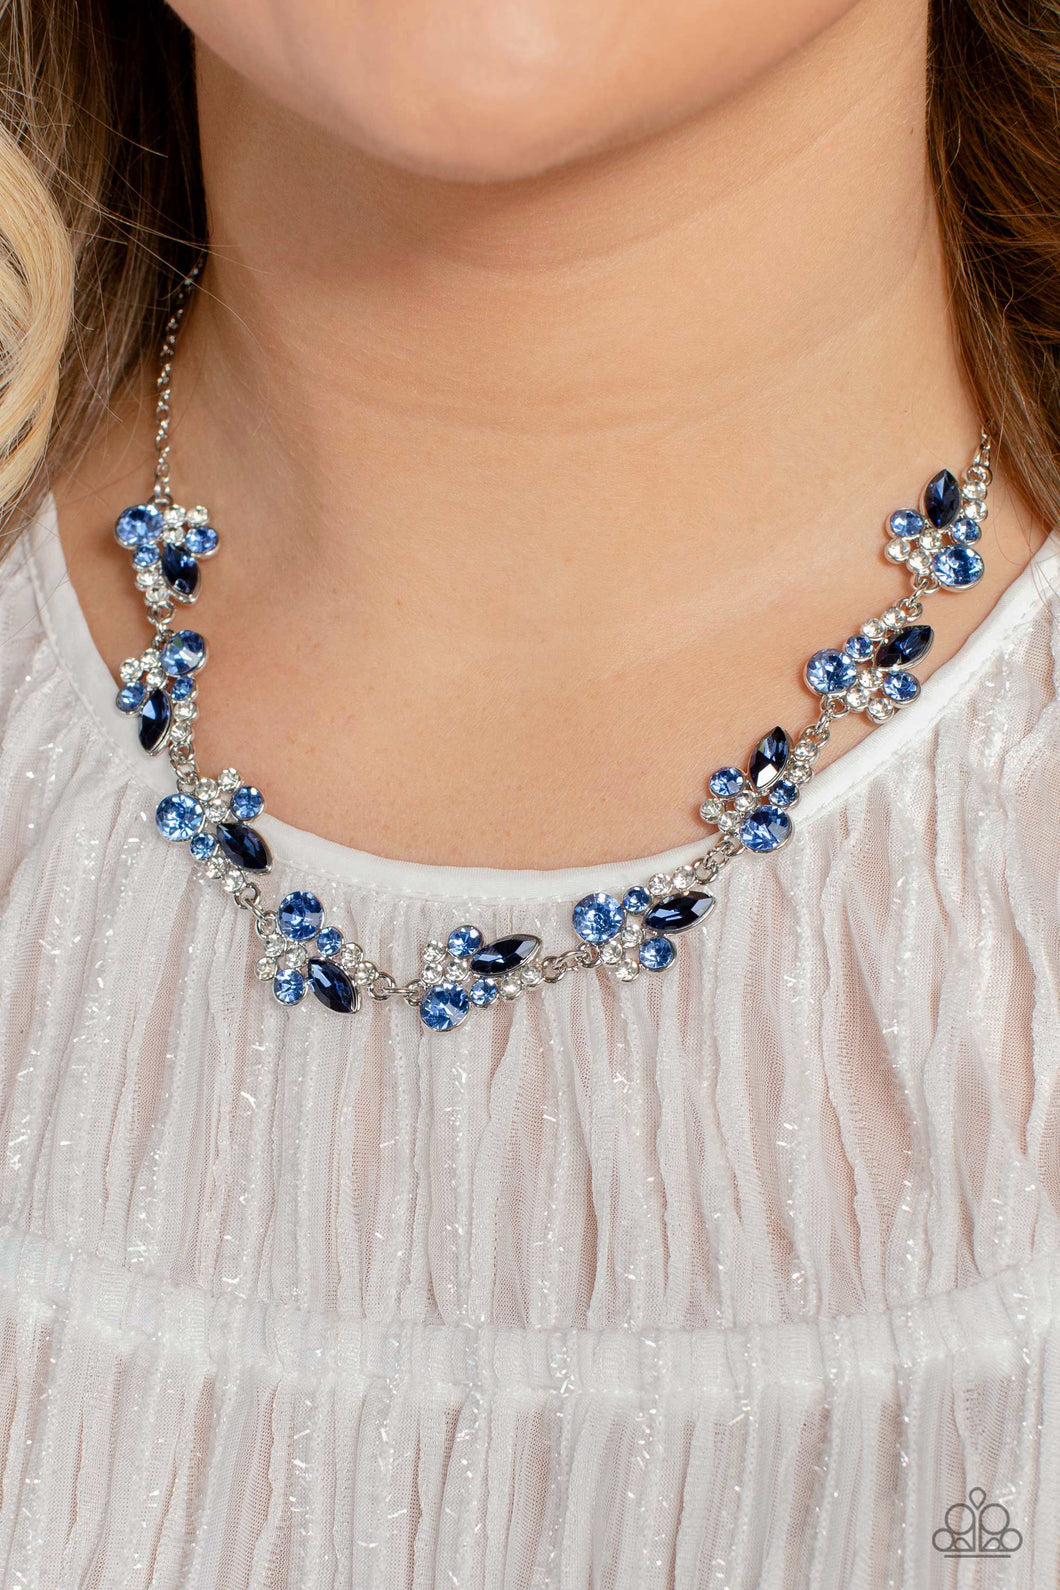 An eclectic collection of white and blue round rhinestones in varying sizes and marquise-cut gems in a blue shade cluster around the collar in high-sheen silver frames. Patterned in an abstract manner, the clusters interlock together, emitting light from every faceted angle. Features an adjustable clasp closure. Includes one pair of matching earrings.